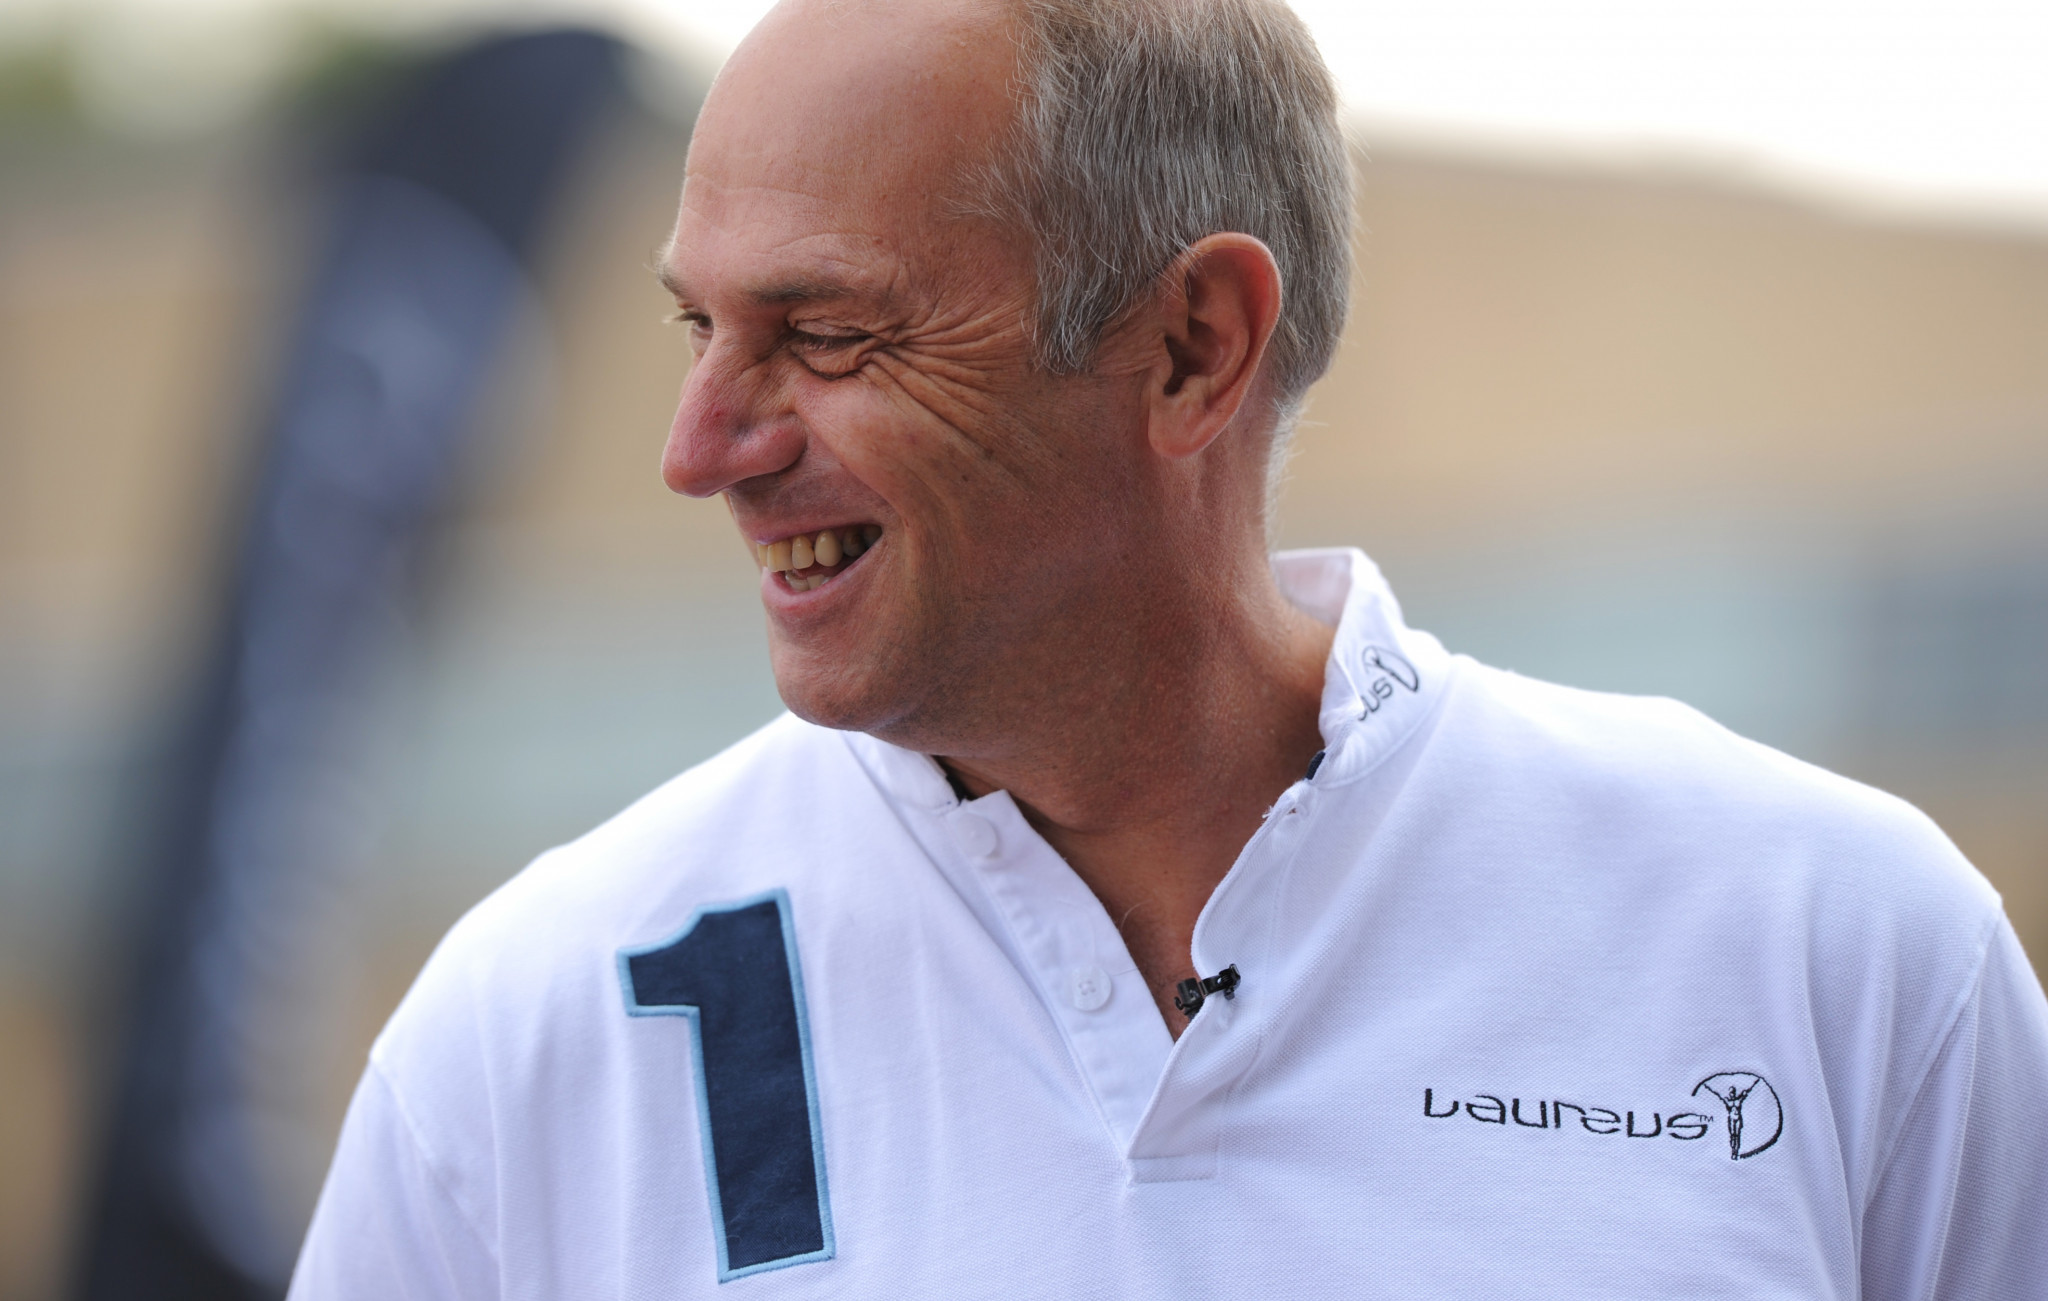 Sir Steve Redgrave appointed first high-performance director of China's national rowing team